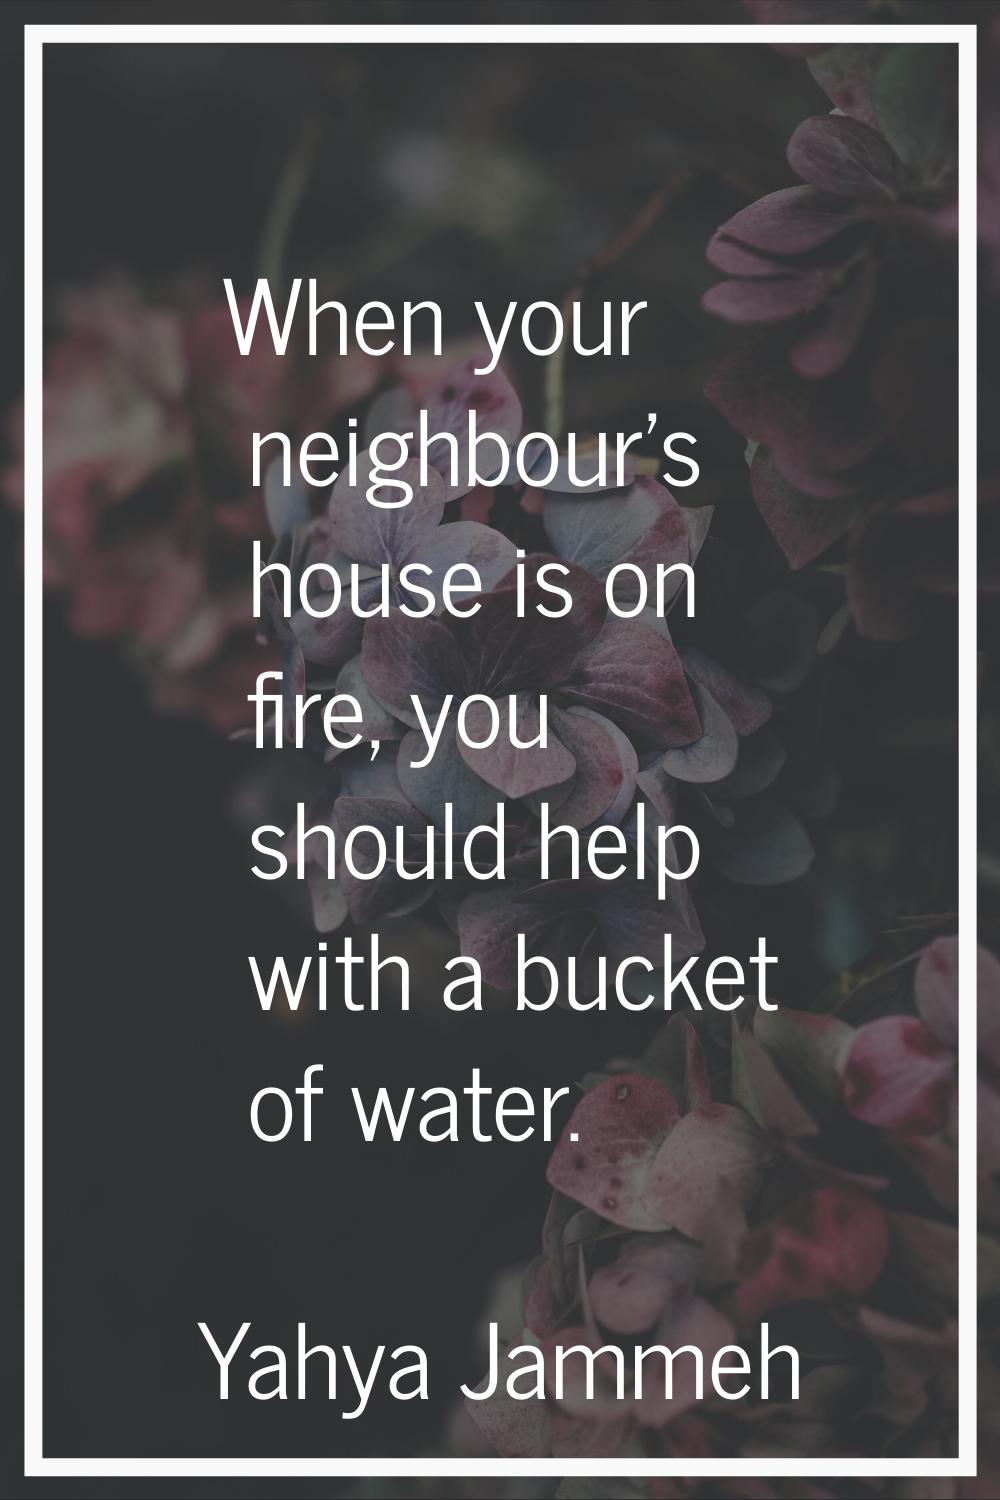 When your neighbour's house is on fire, you should help with a bucket of water.